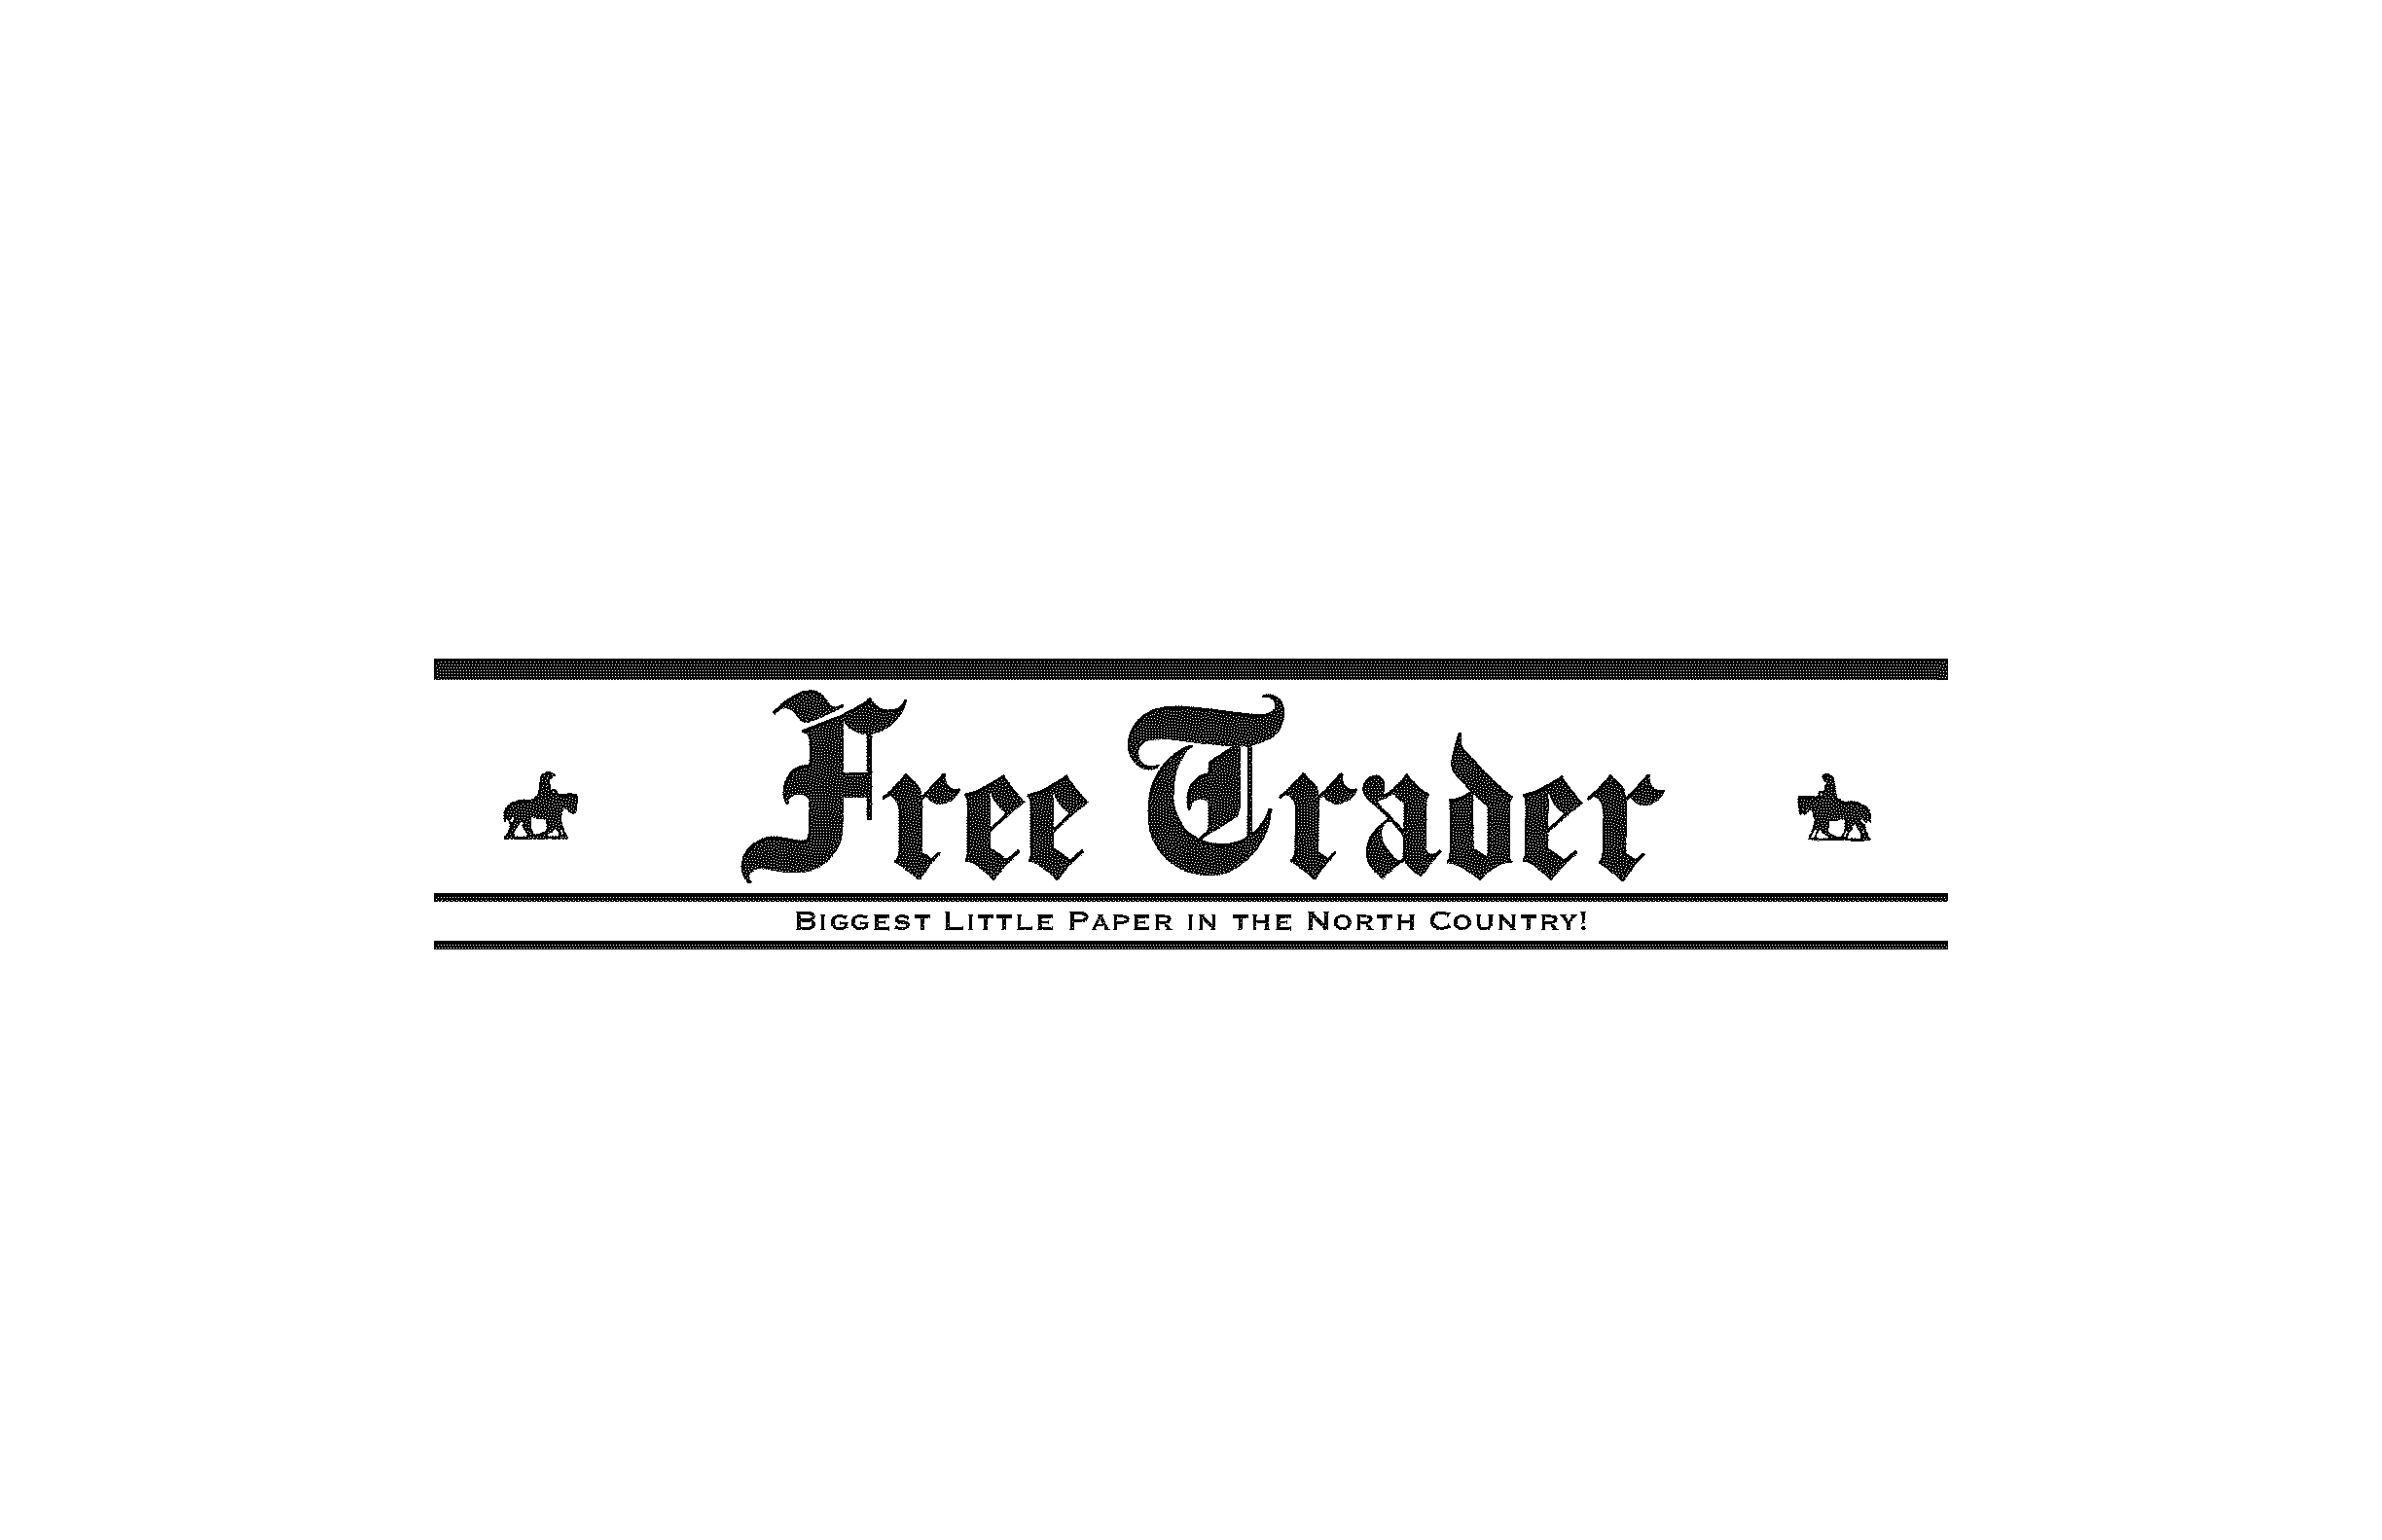 FREE TRADER BIGGEST LITTLE PAPER IN THE NORTH COUNTRY